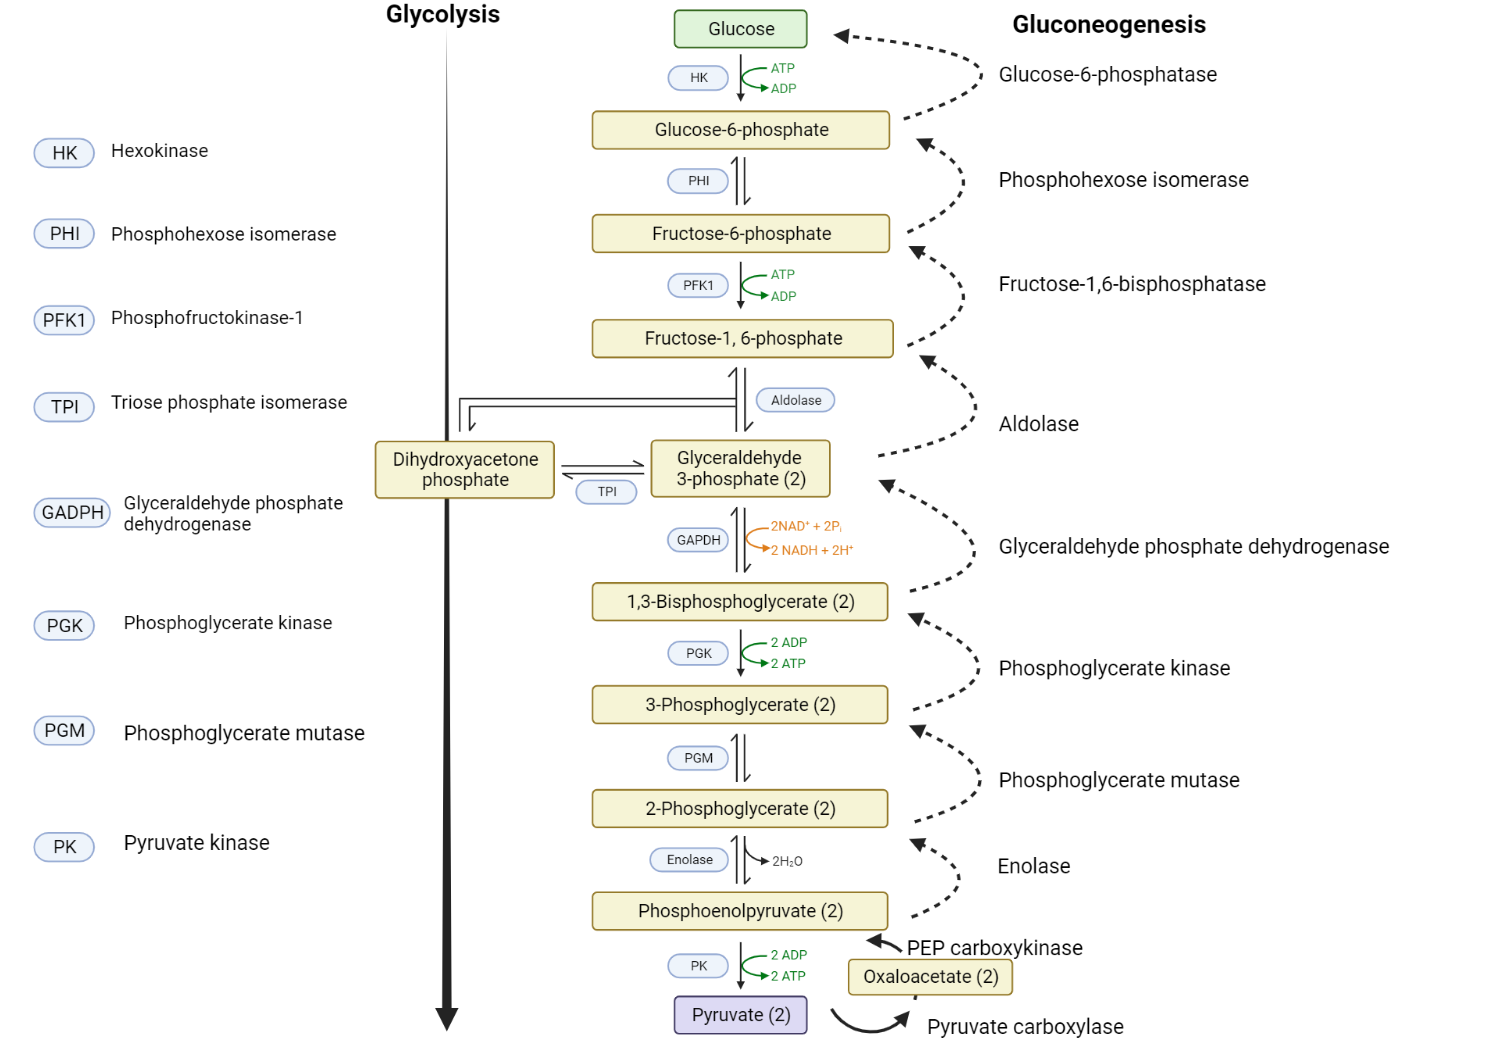 Comparison of glycolysis and gluconeogenesis.